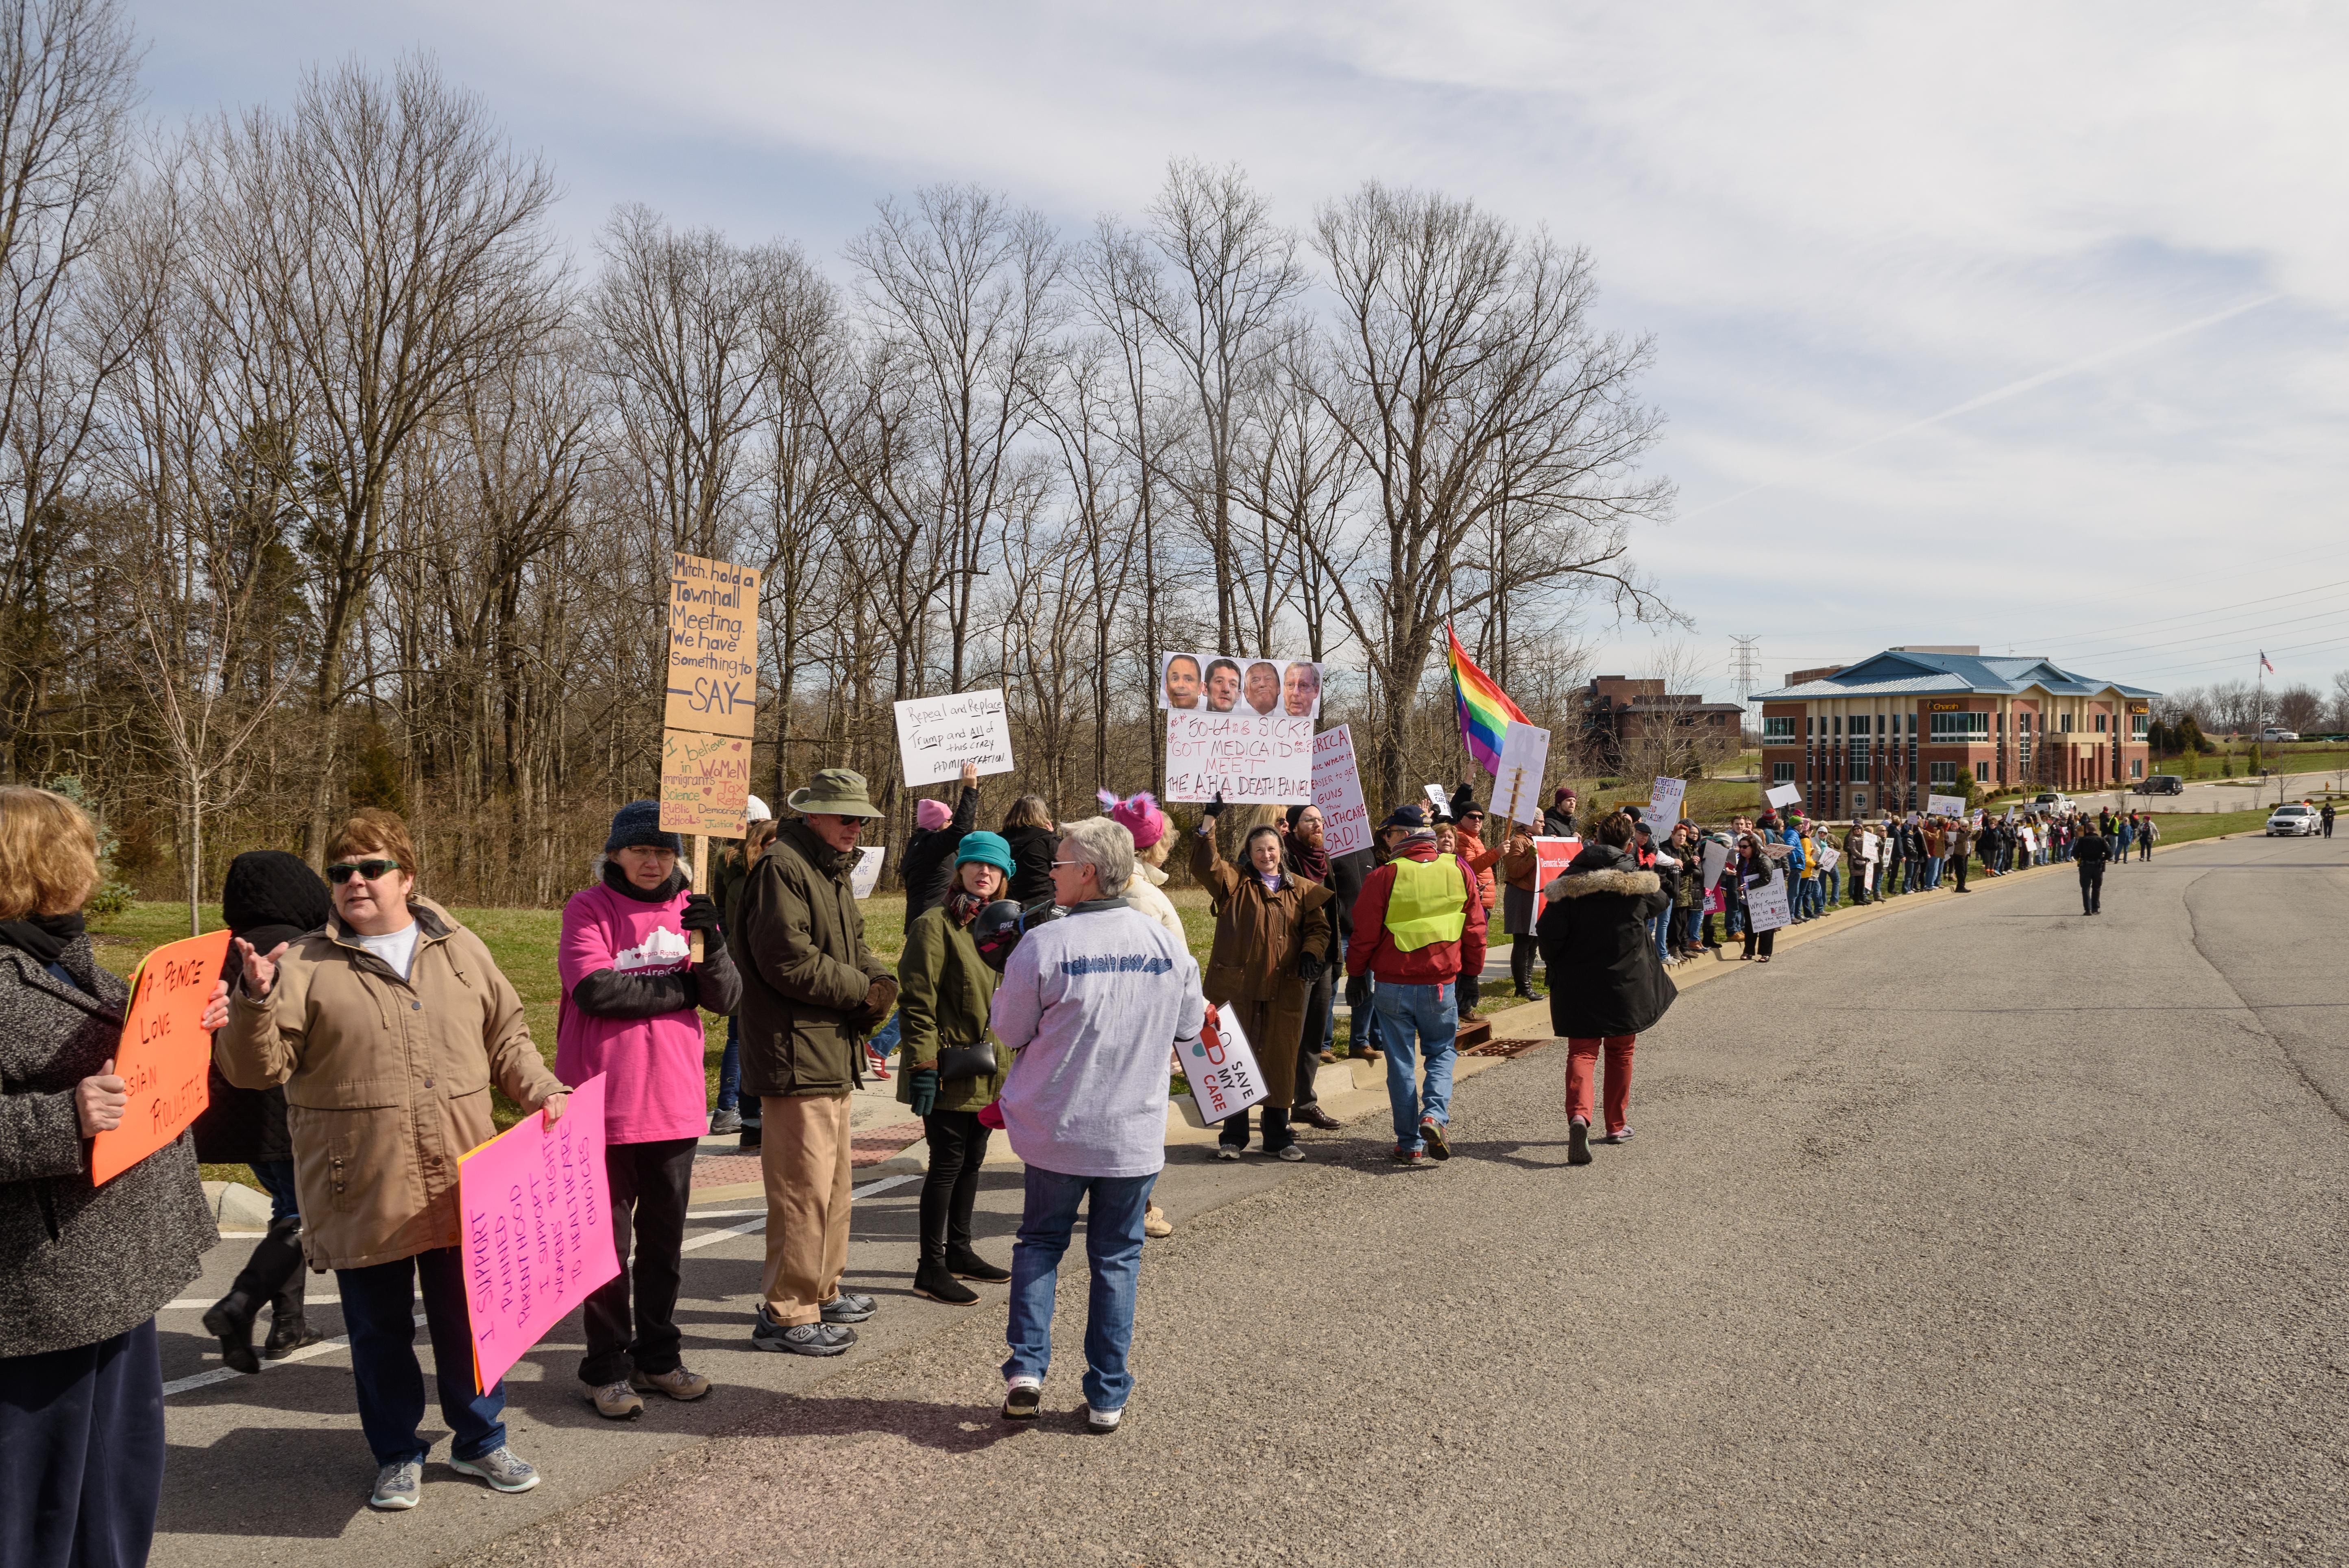 Protest organizers stretch their line from the corner at Tucker Station Road along Plantside Drive closer to where Vice President Pence is speaking. - BRIAN BOHANNON